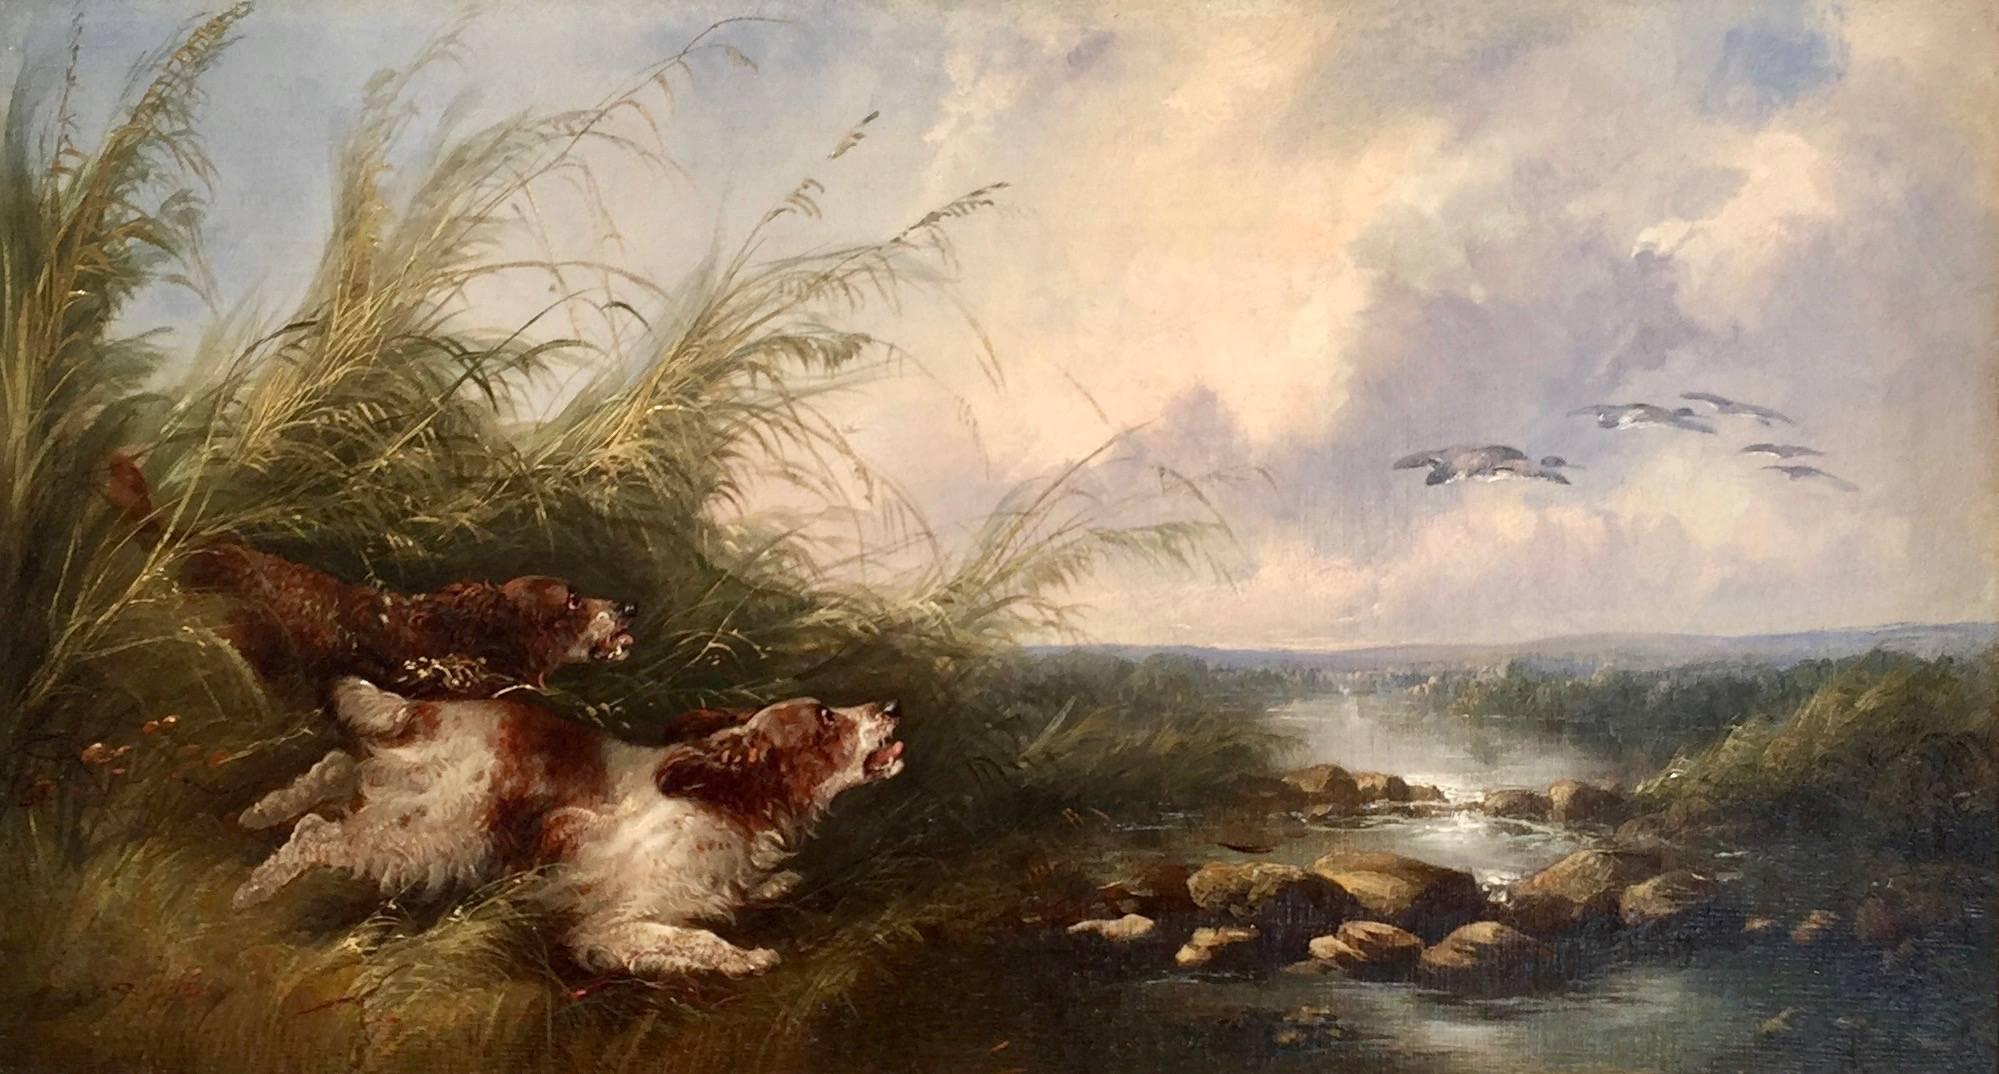 Antique Victorian 19thC English Spaniel dogs chasing ducks by a river landscape - Painting by George Armfield